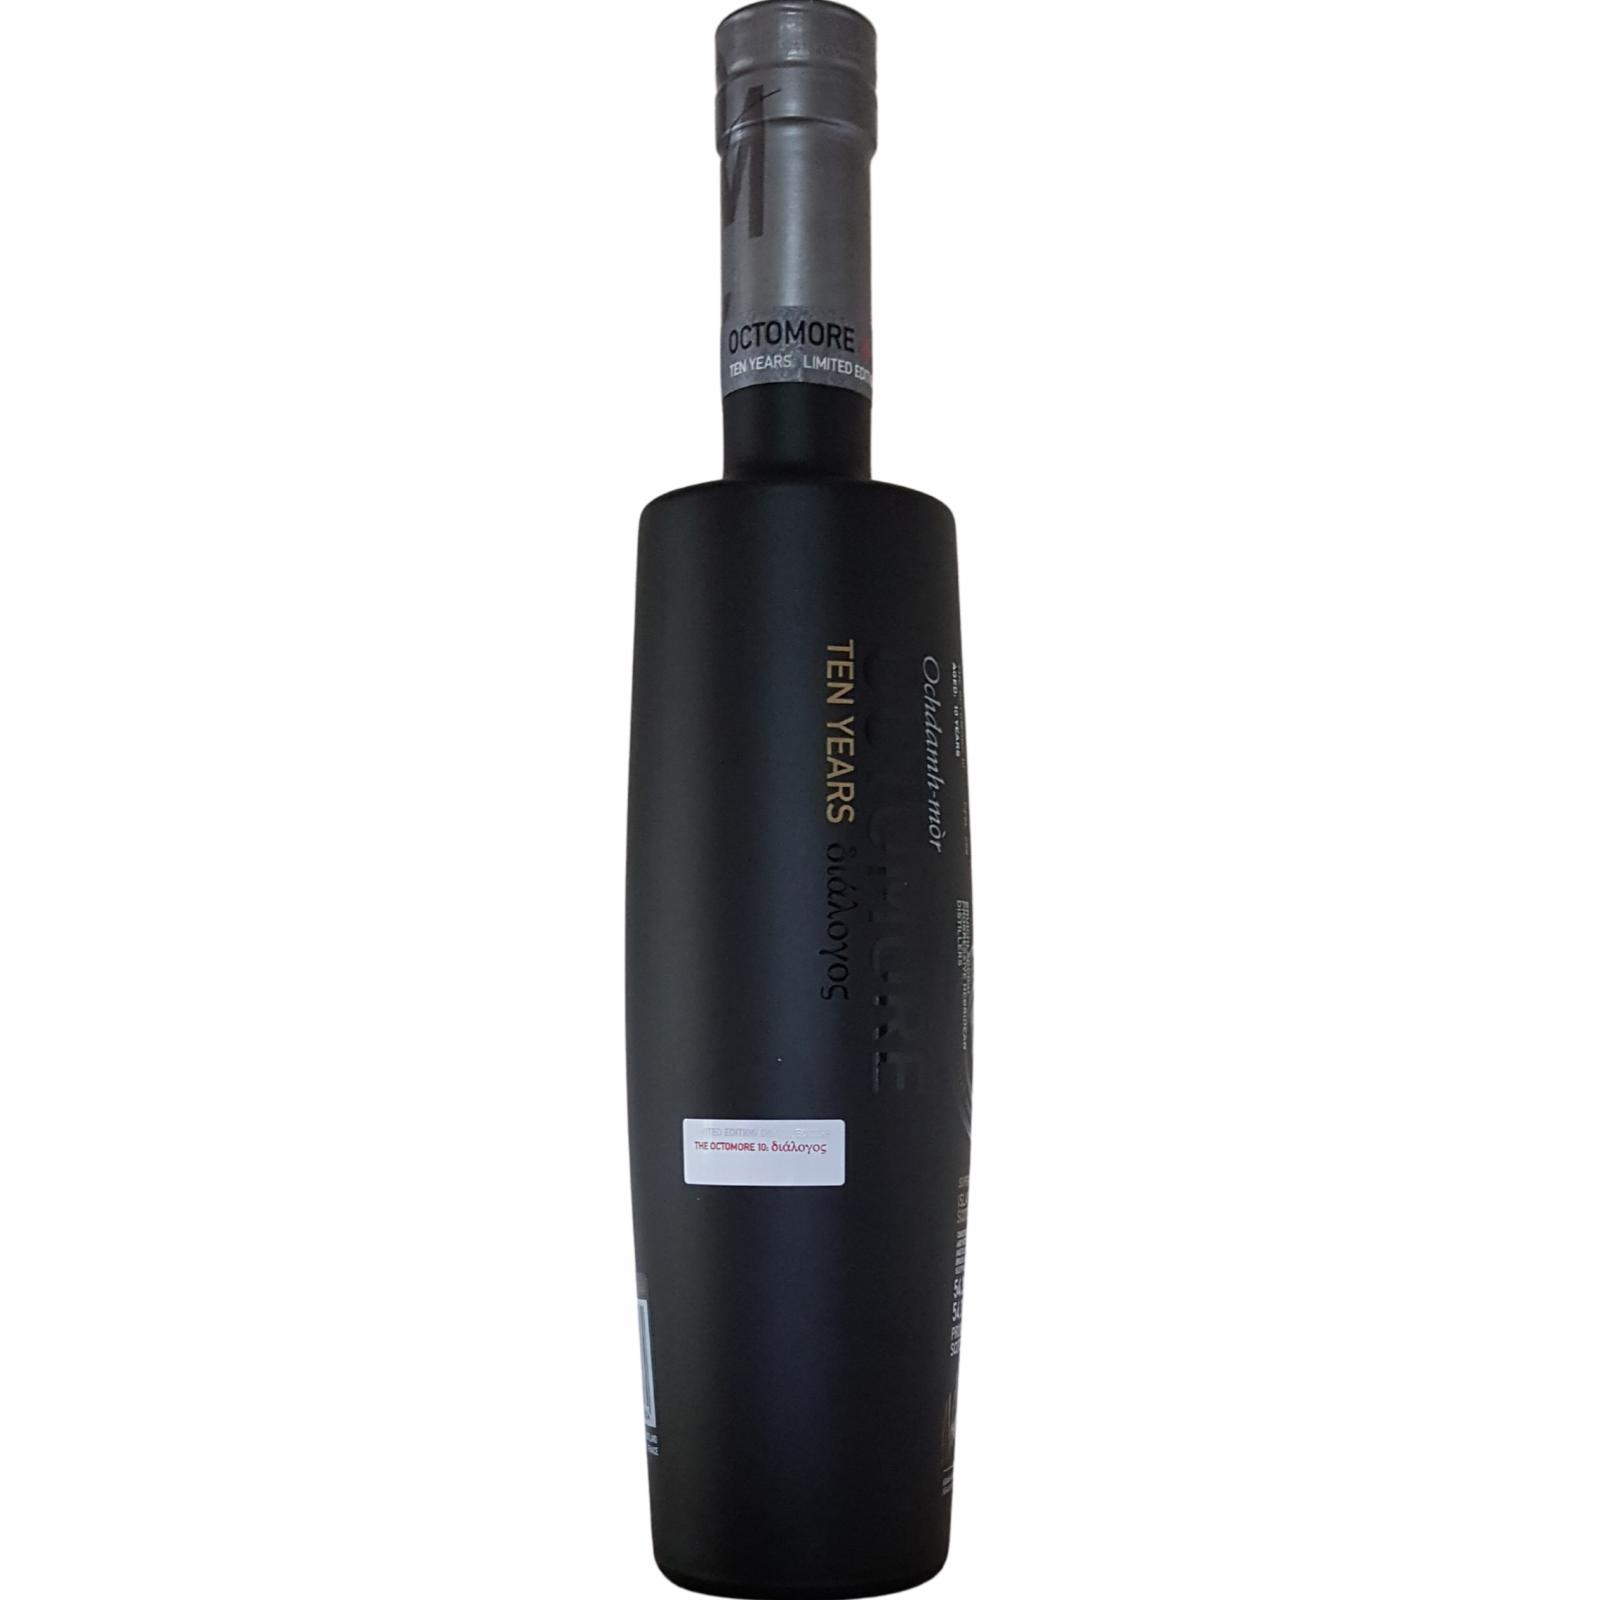 Read more about the article Octomore 2009 10 years